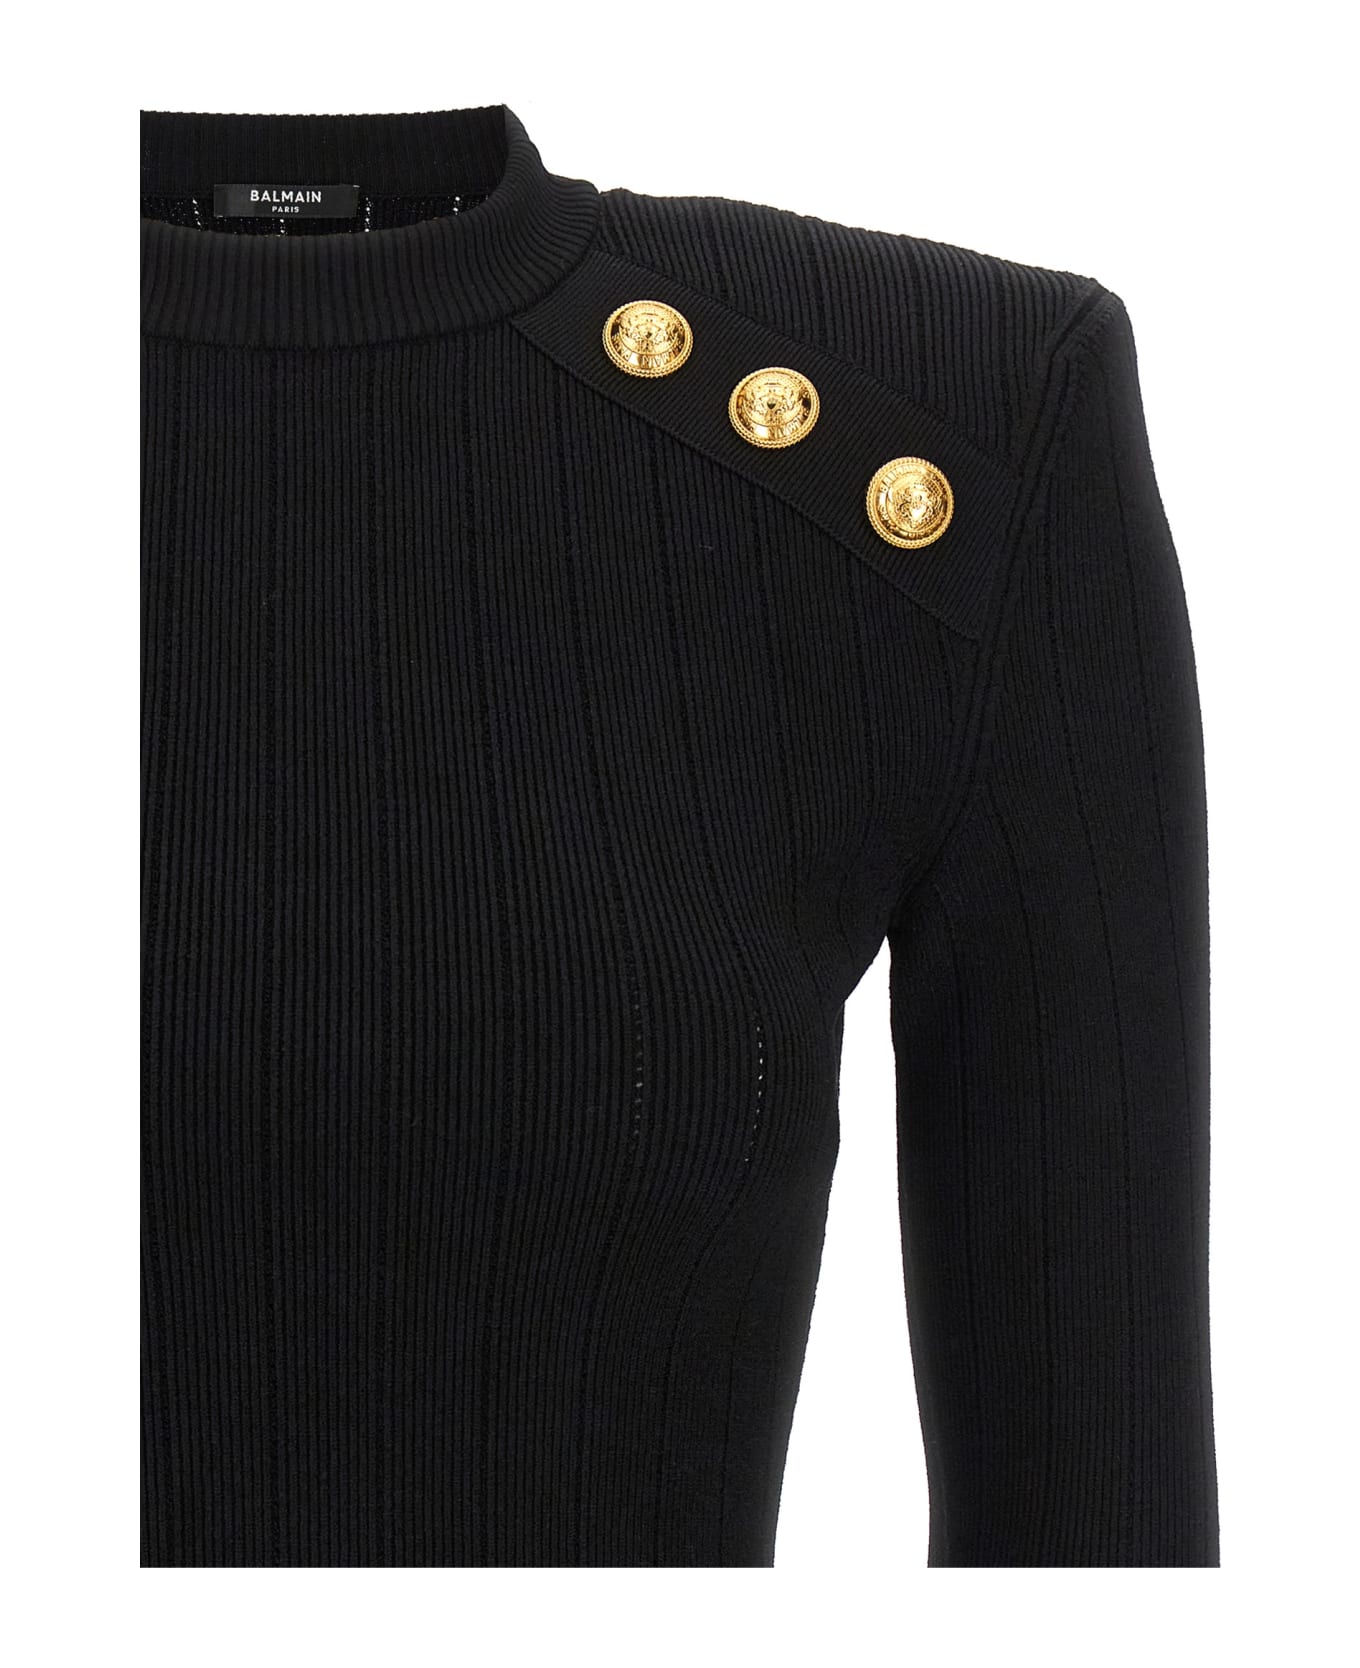 Balmain Crew-neck Sweater With Buttons - Black